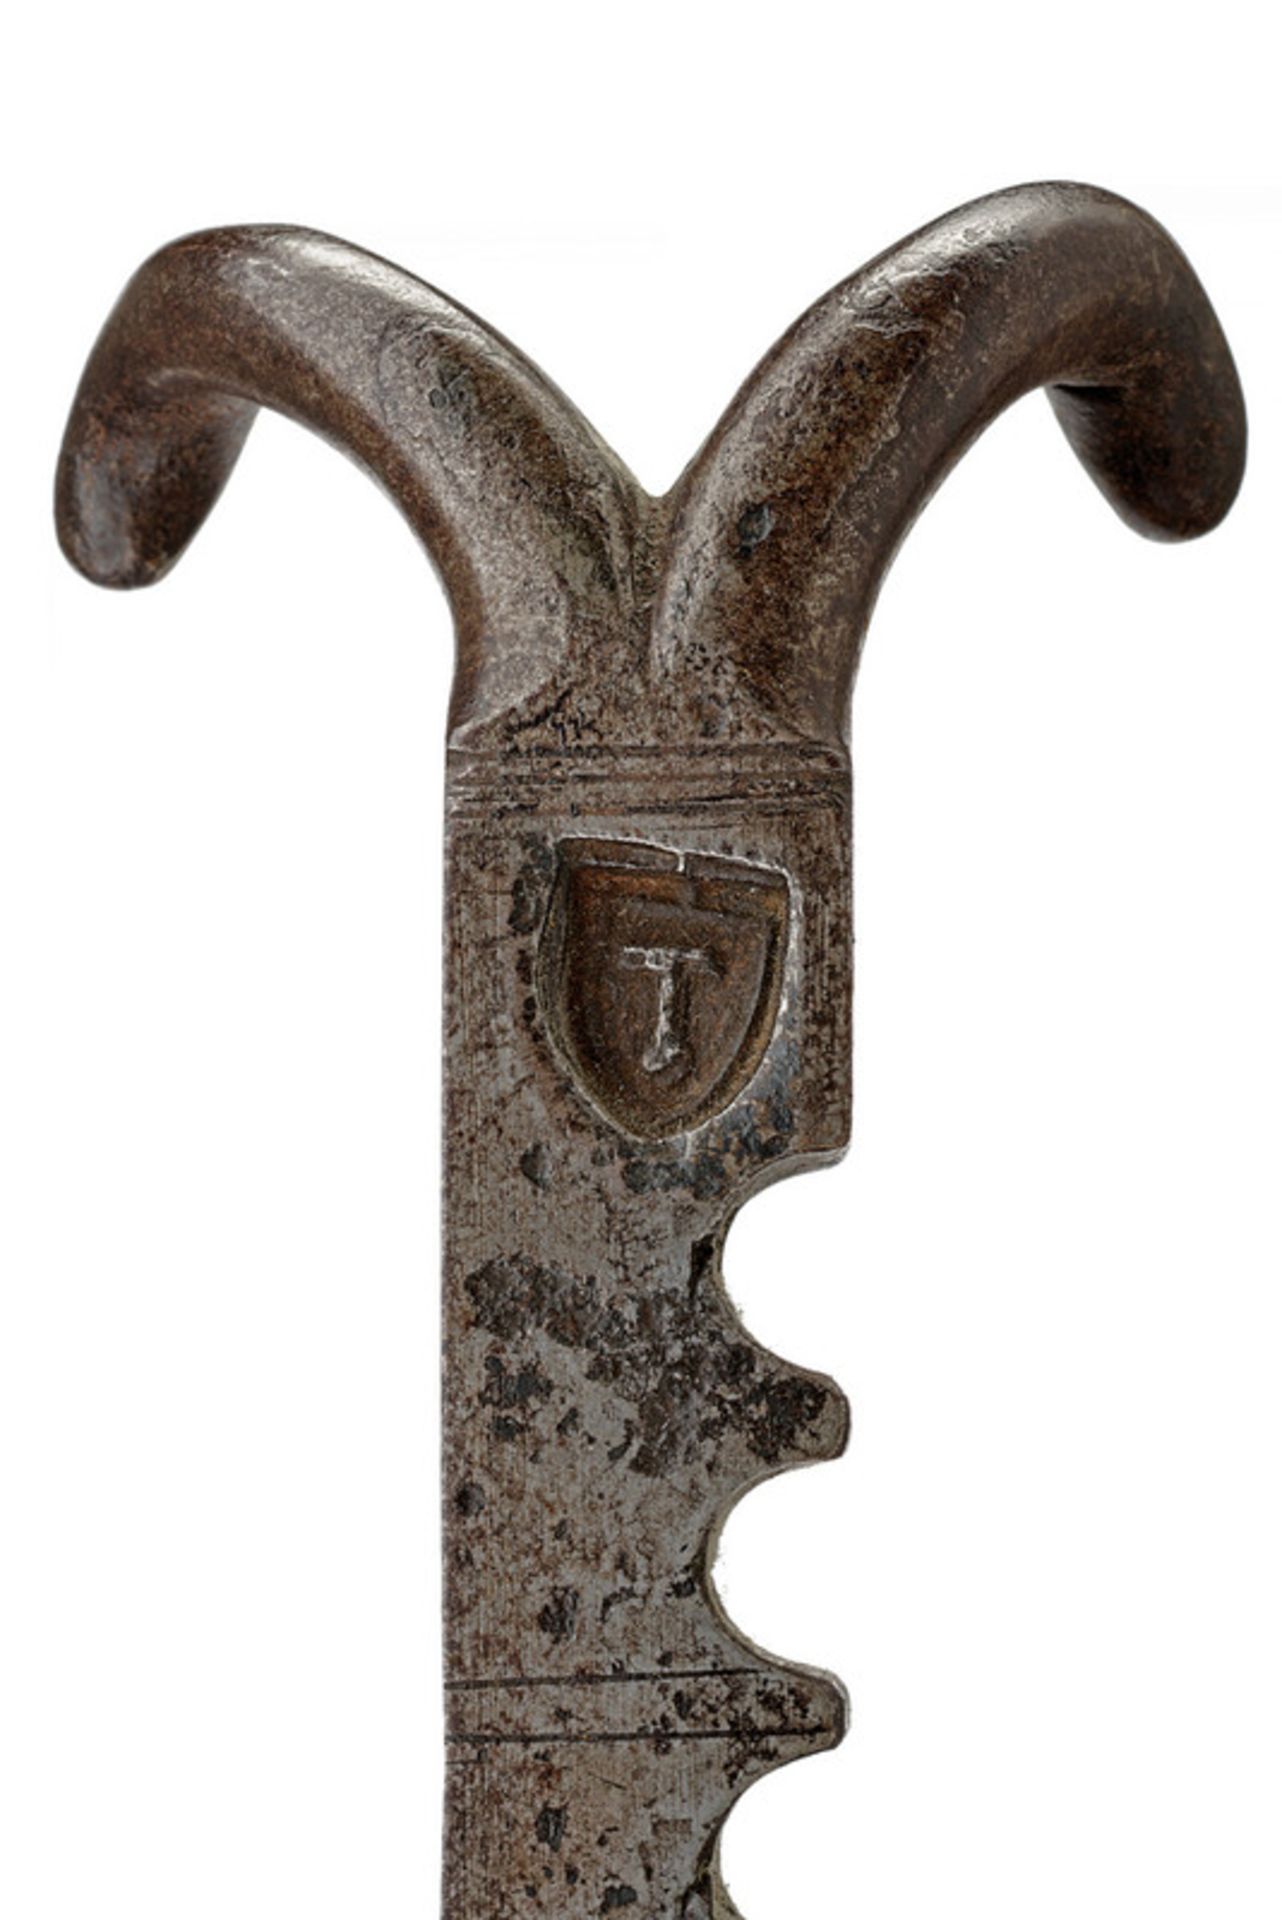 A crossbow jack dating: 17th Century provenance: Germany Round, iron box containing a toothed wheel, - Image 2 of 5